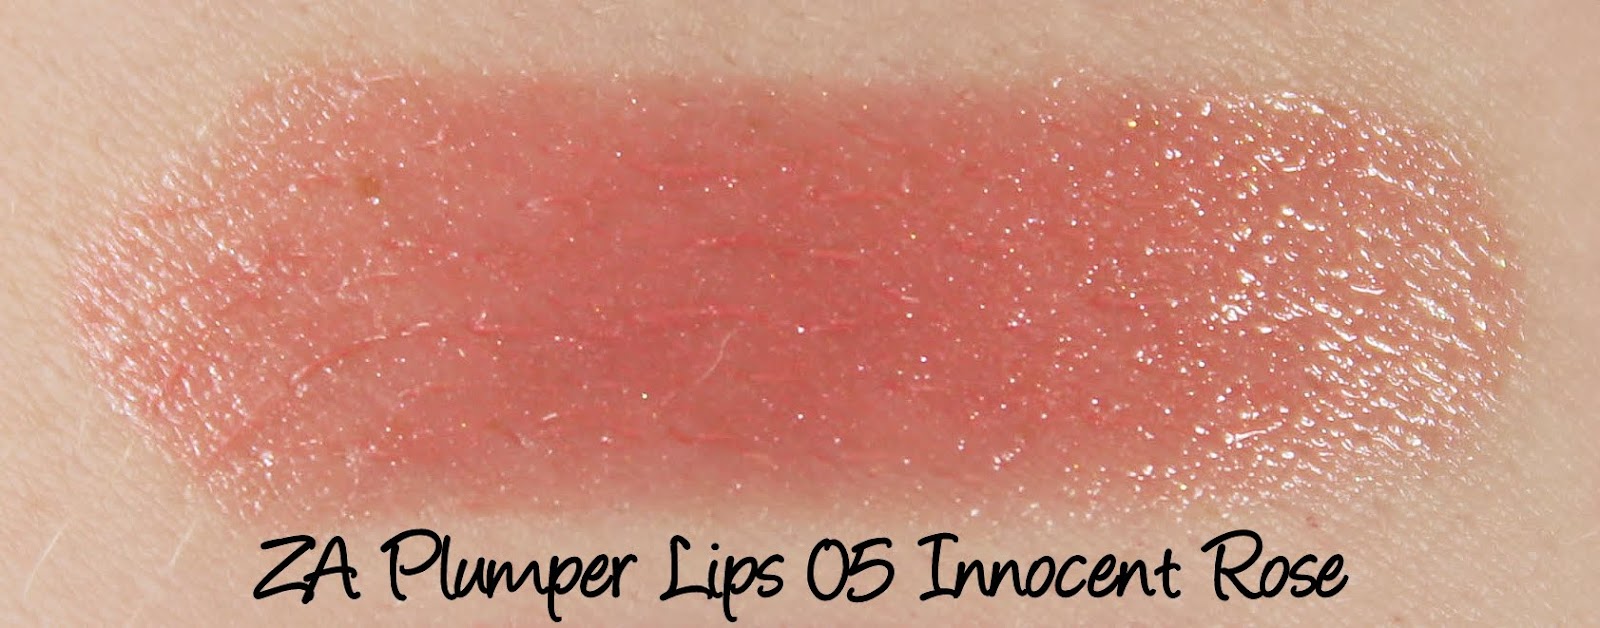 ZA Plumper Lips - 05 Innocent Rose lipstick swatches & review